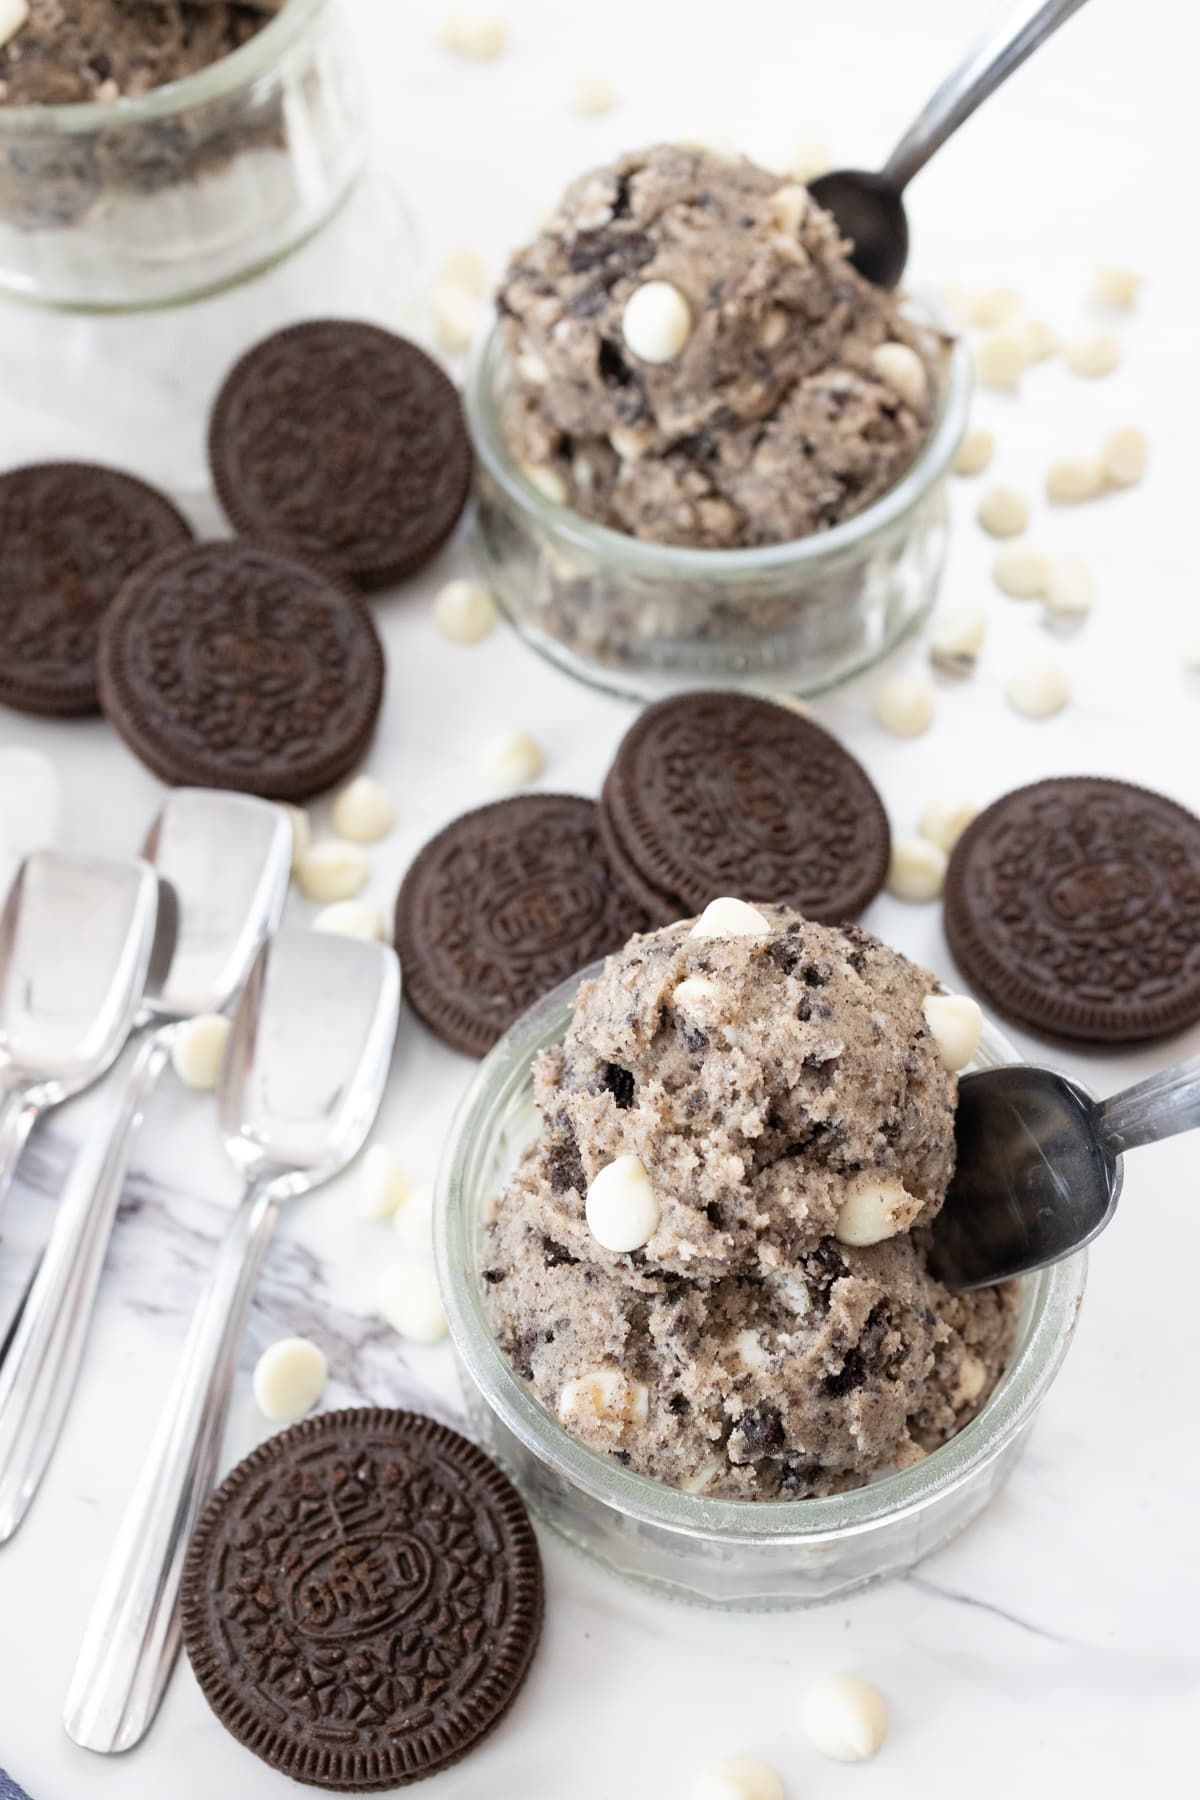 Top view of small glass bowls containing Edible Cookie Dough that has a spoon and an oreo cookie sticking out of it like an ice cream wafer, on a white surface.